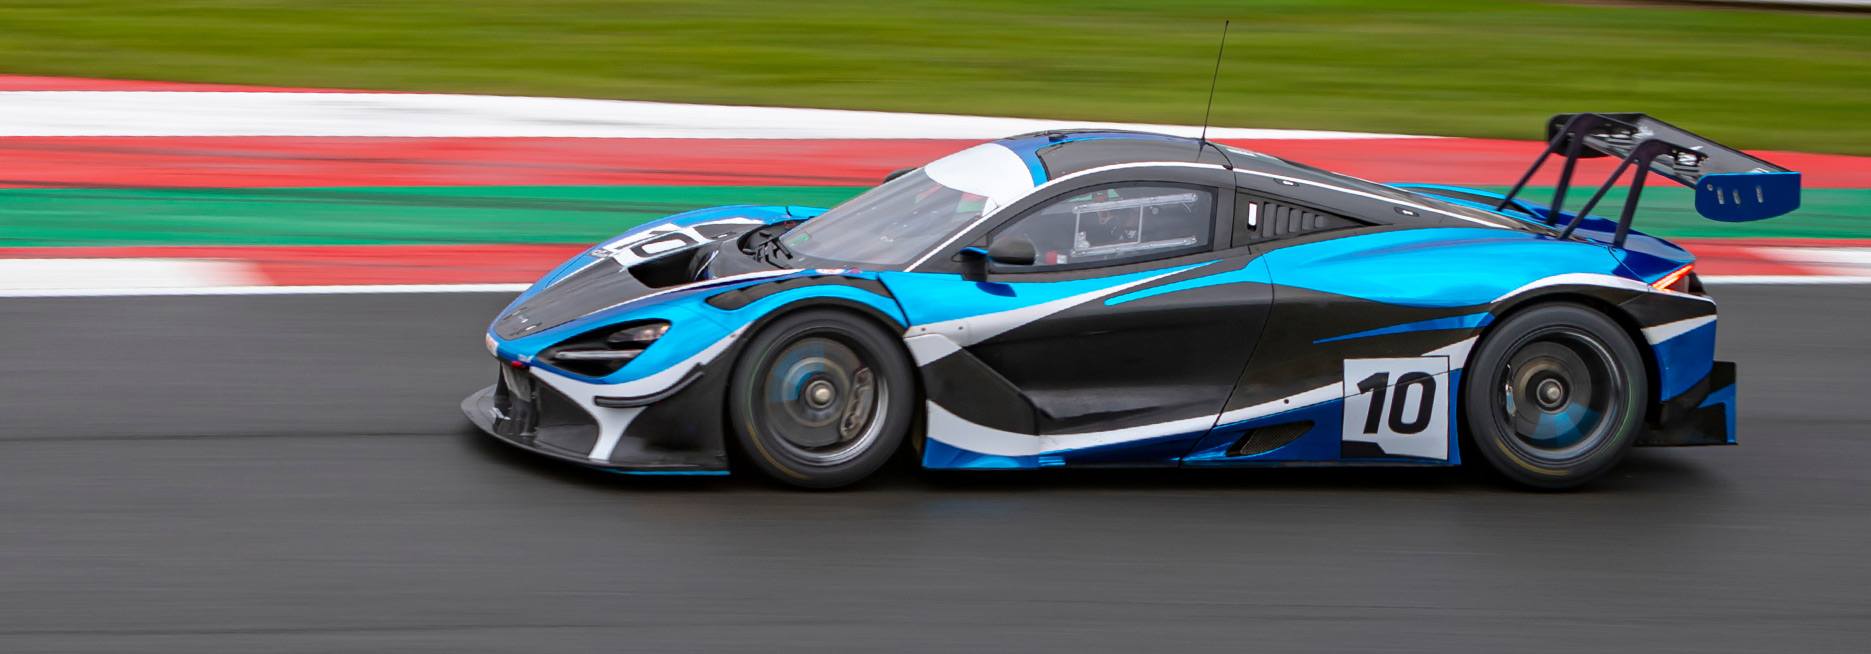 Race car branding with blue and black livery and the number 10 display